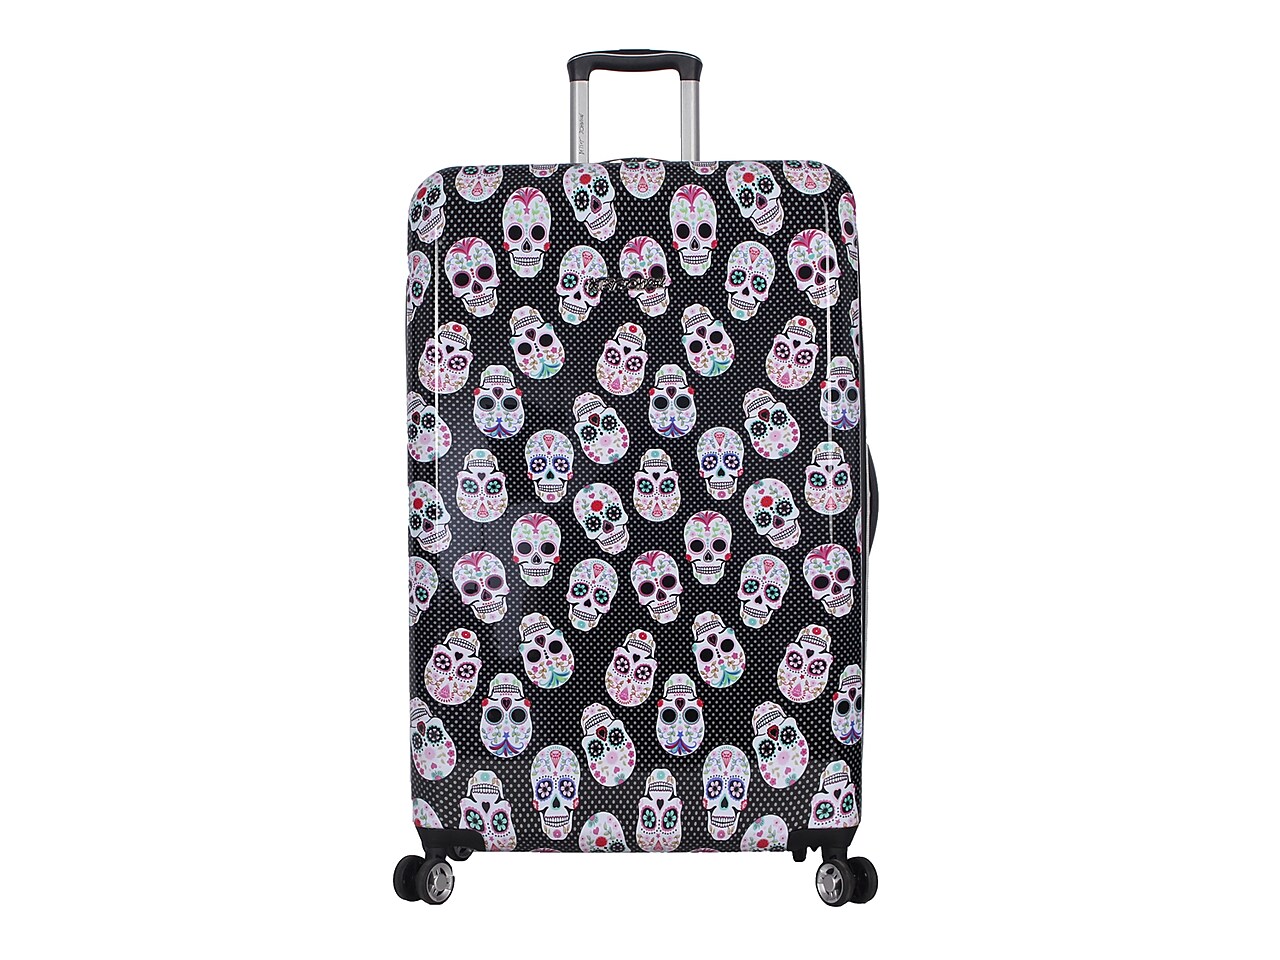 Betsey Johnson Luggage Skull Party 30Inch Checked Hard